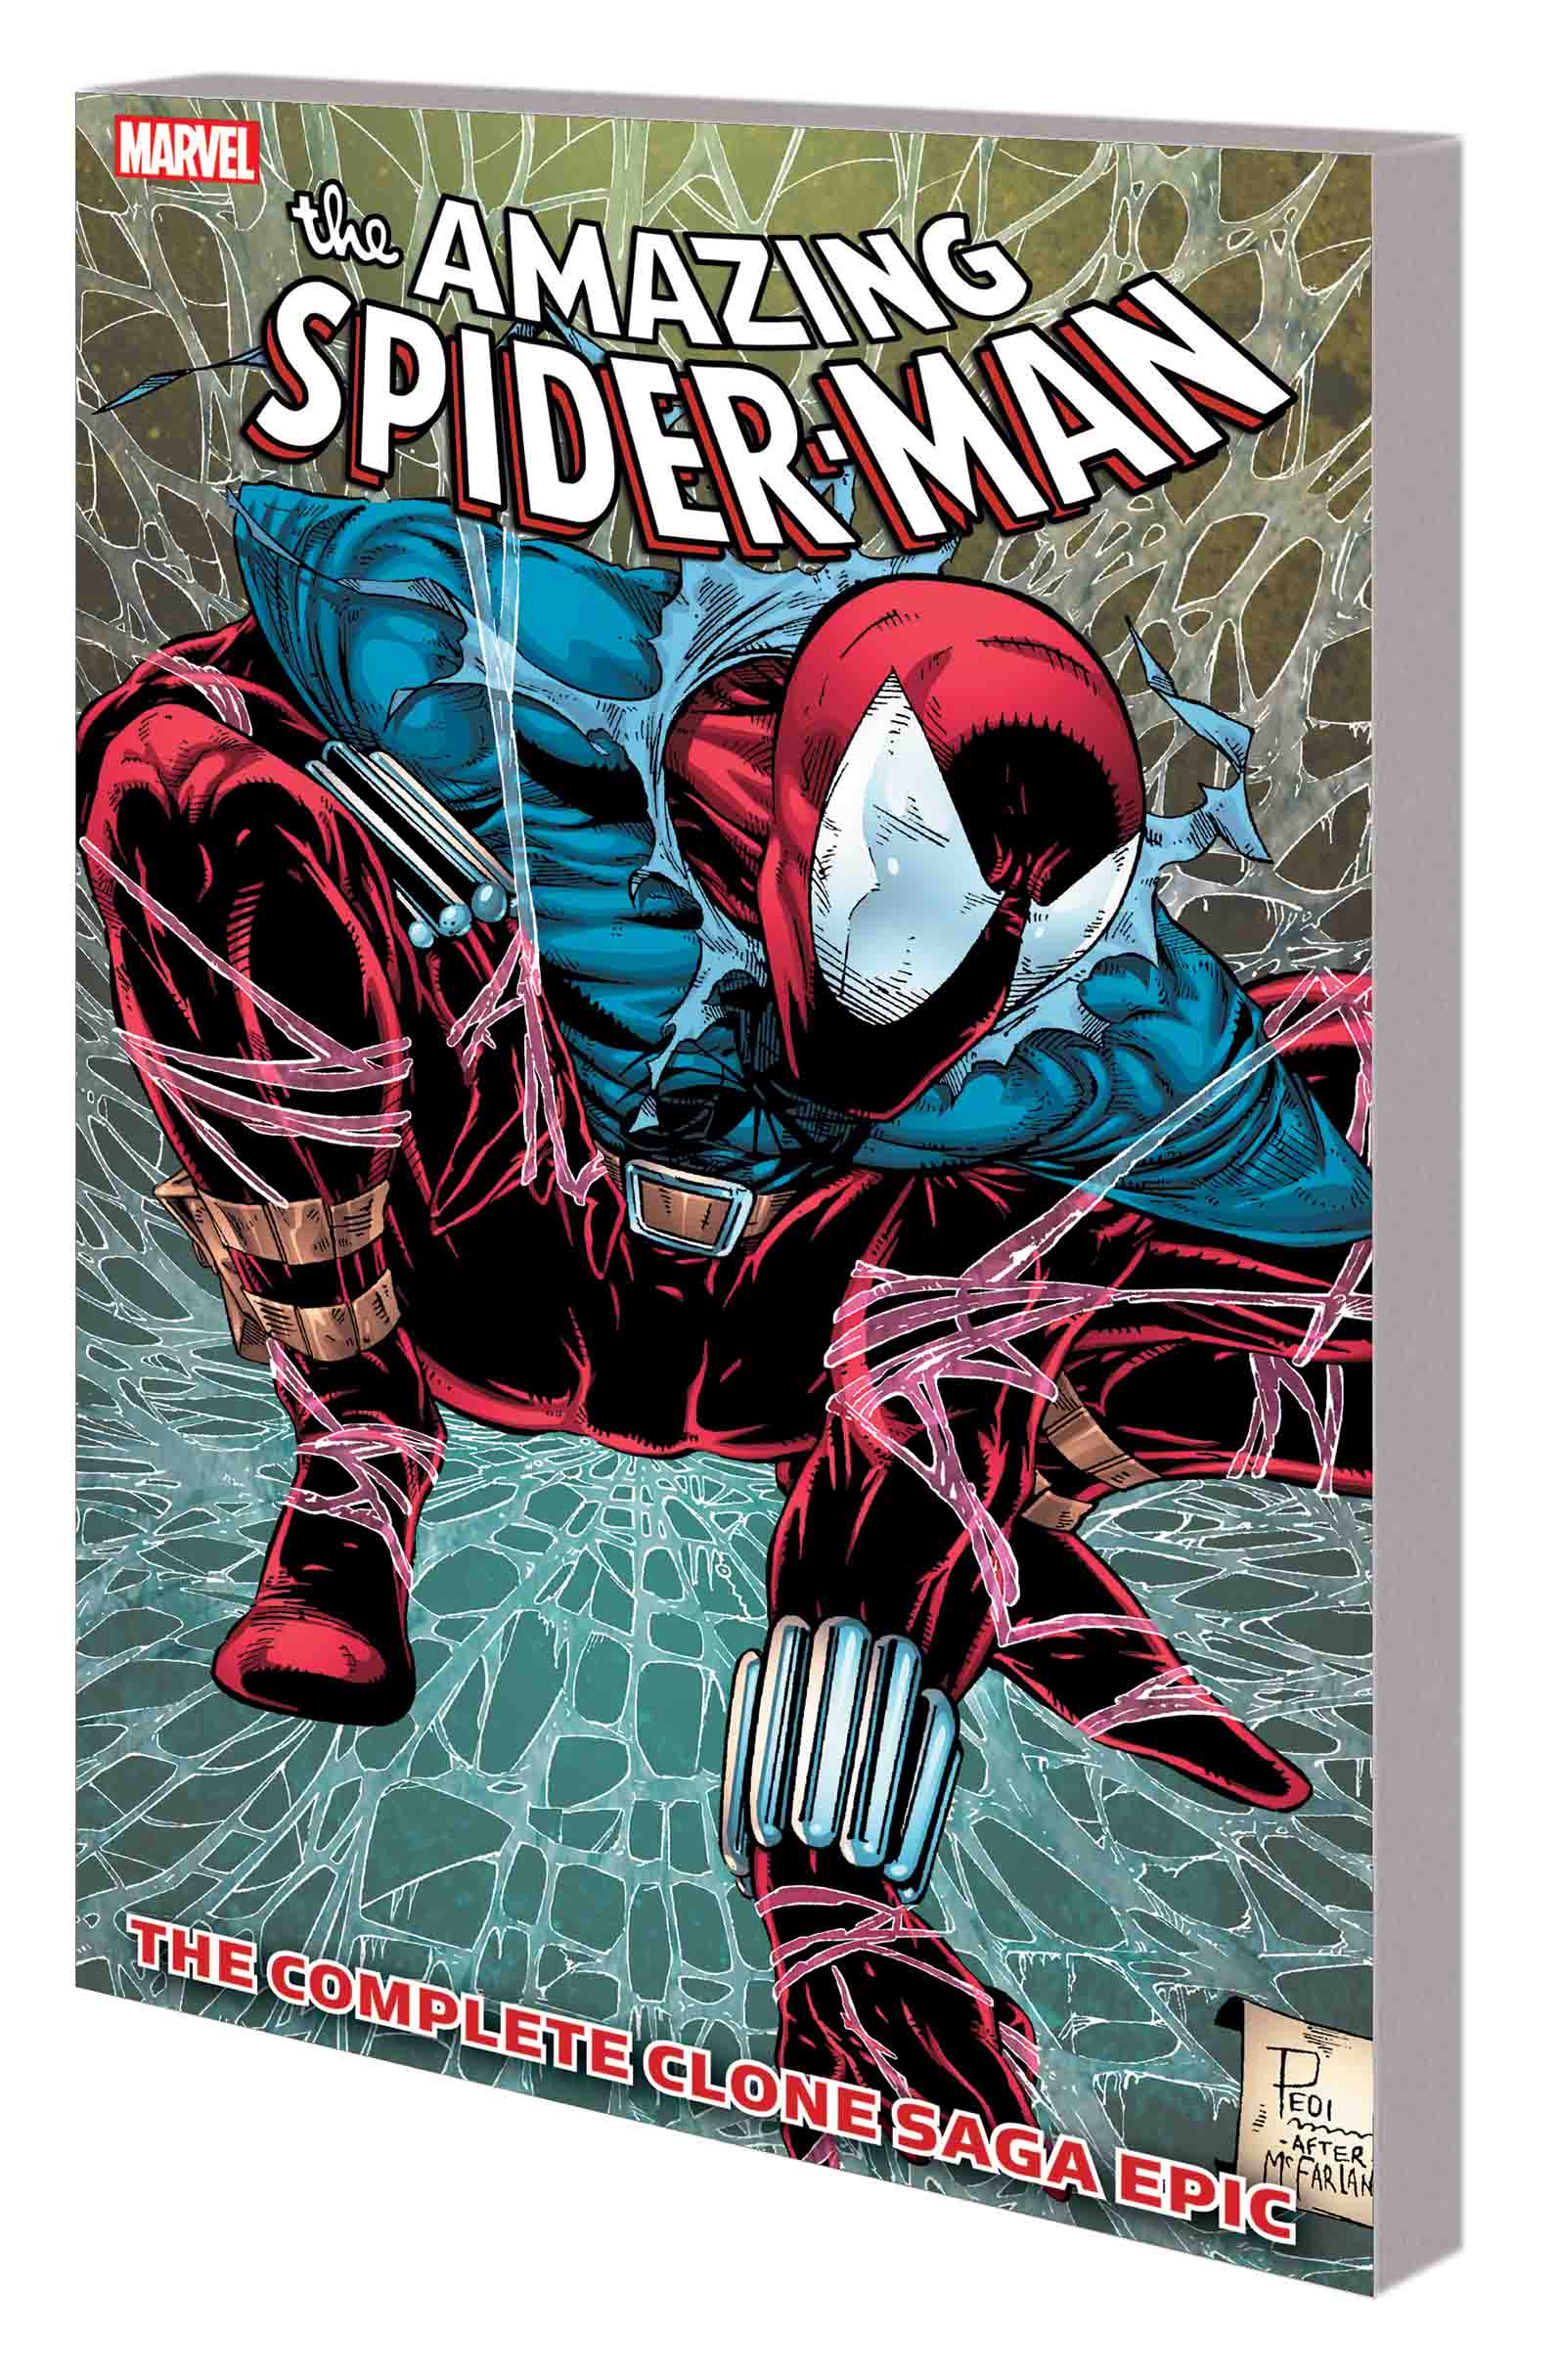 SPIDER-MAN: THE COMPLETE CLONE SAGA EPIC BOOK 3 TPB (NEW PRINTING)